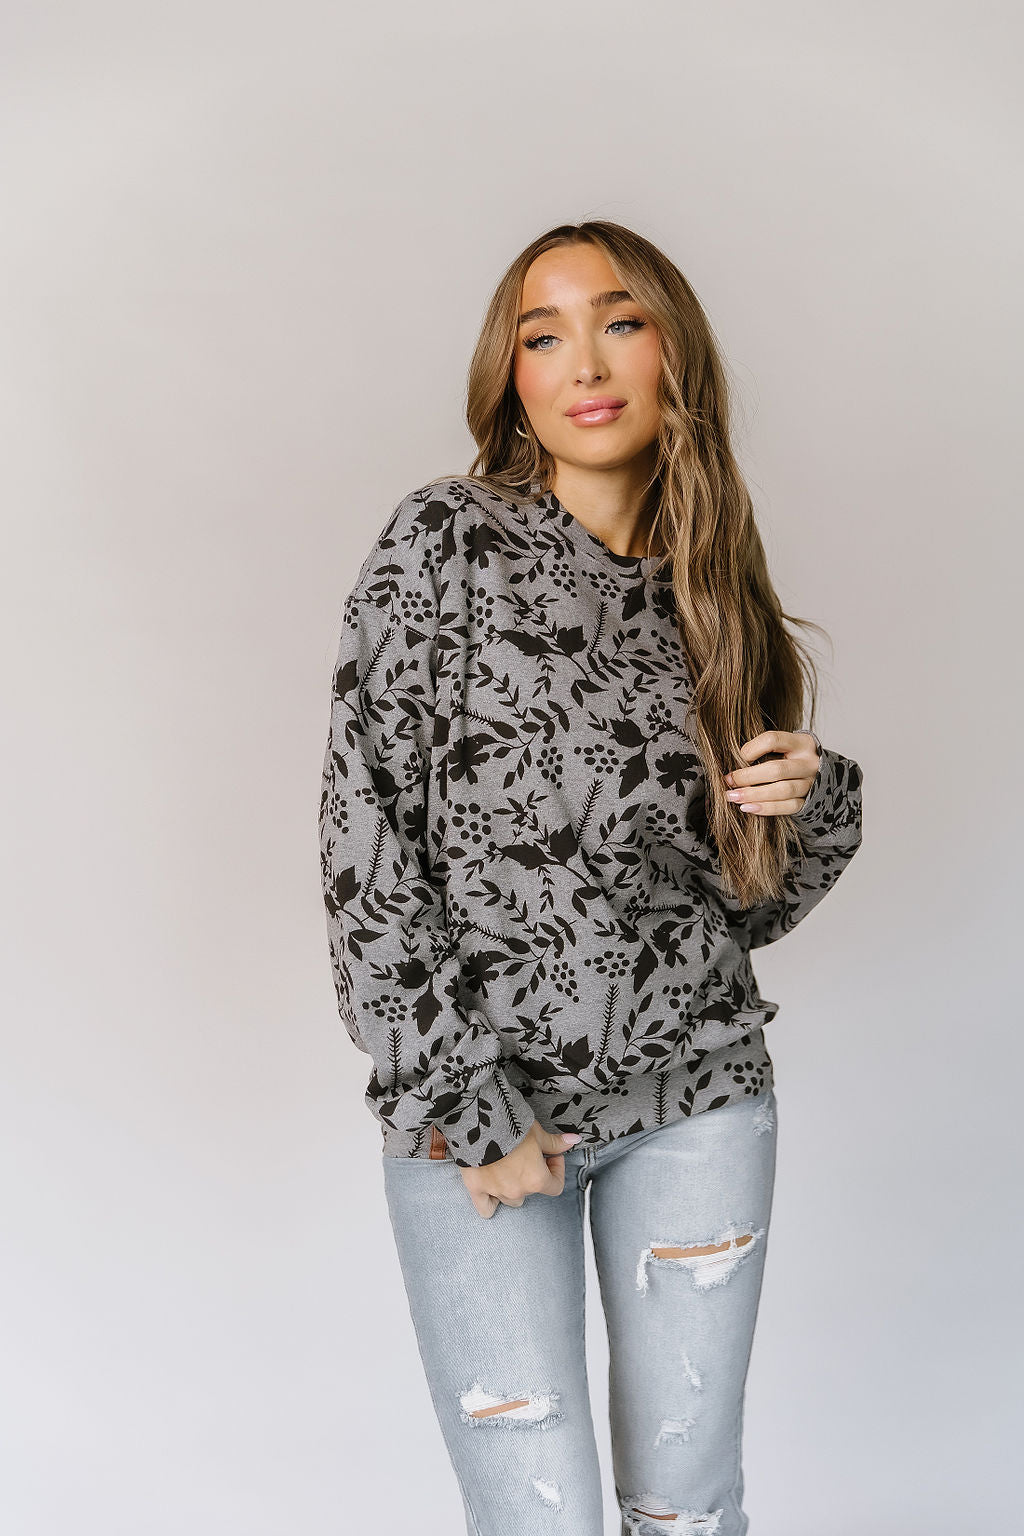 Ampersand Avenue University Pullover - Fall into Place